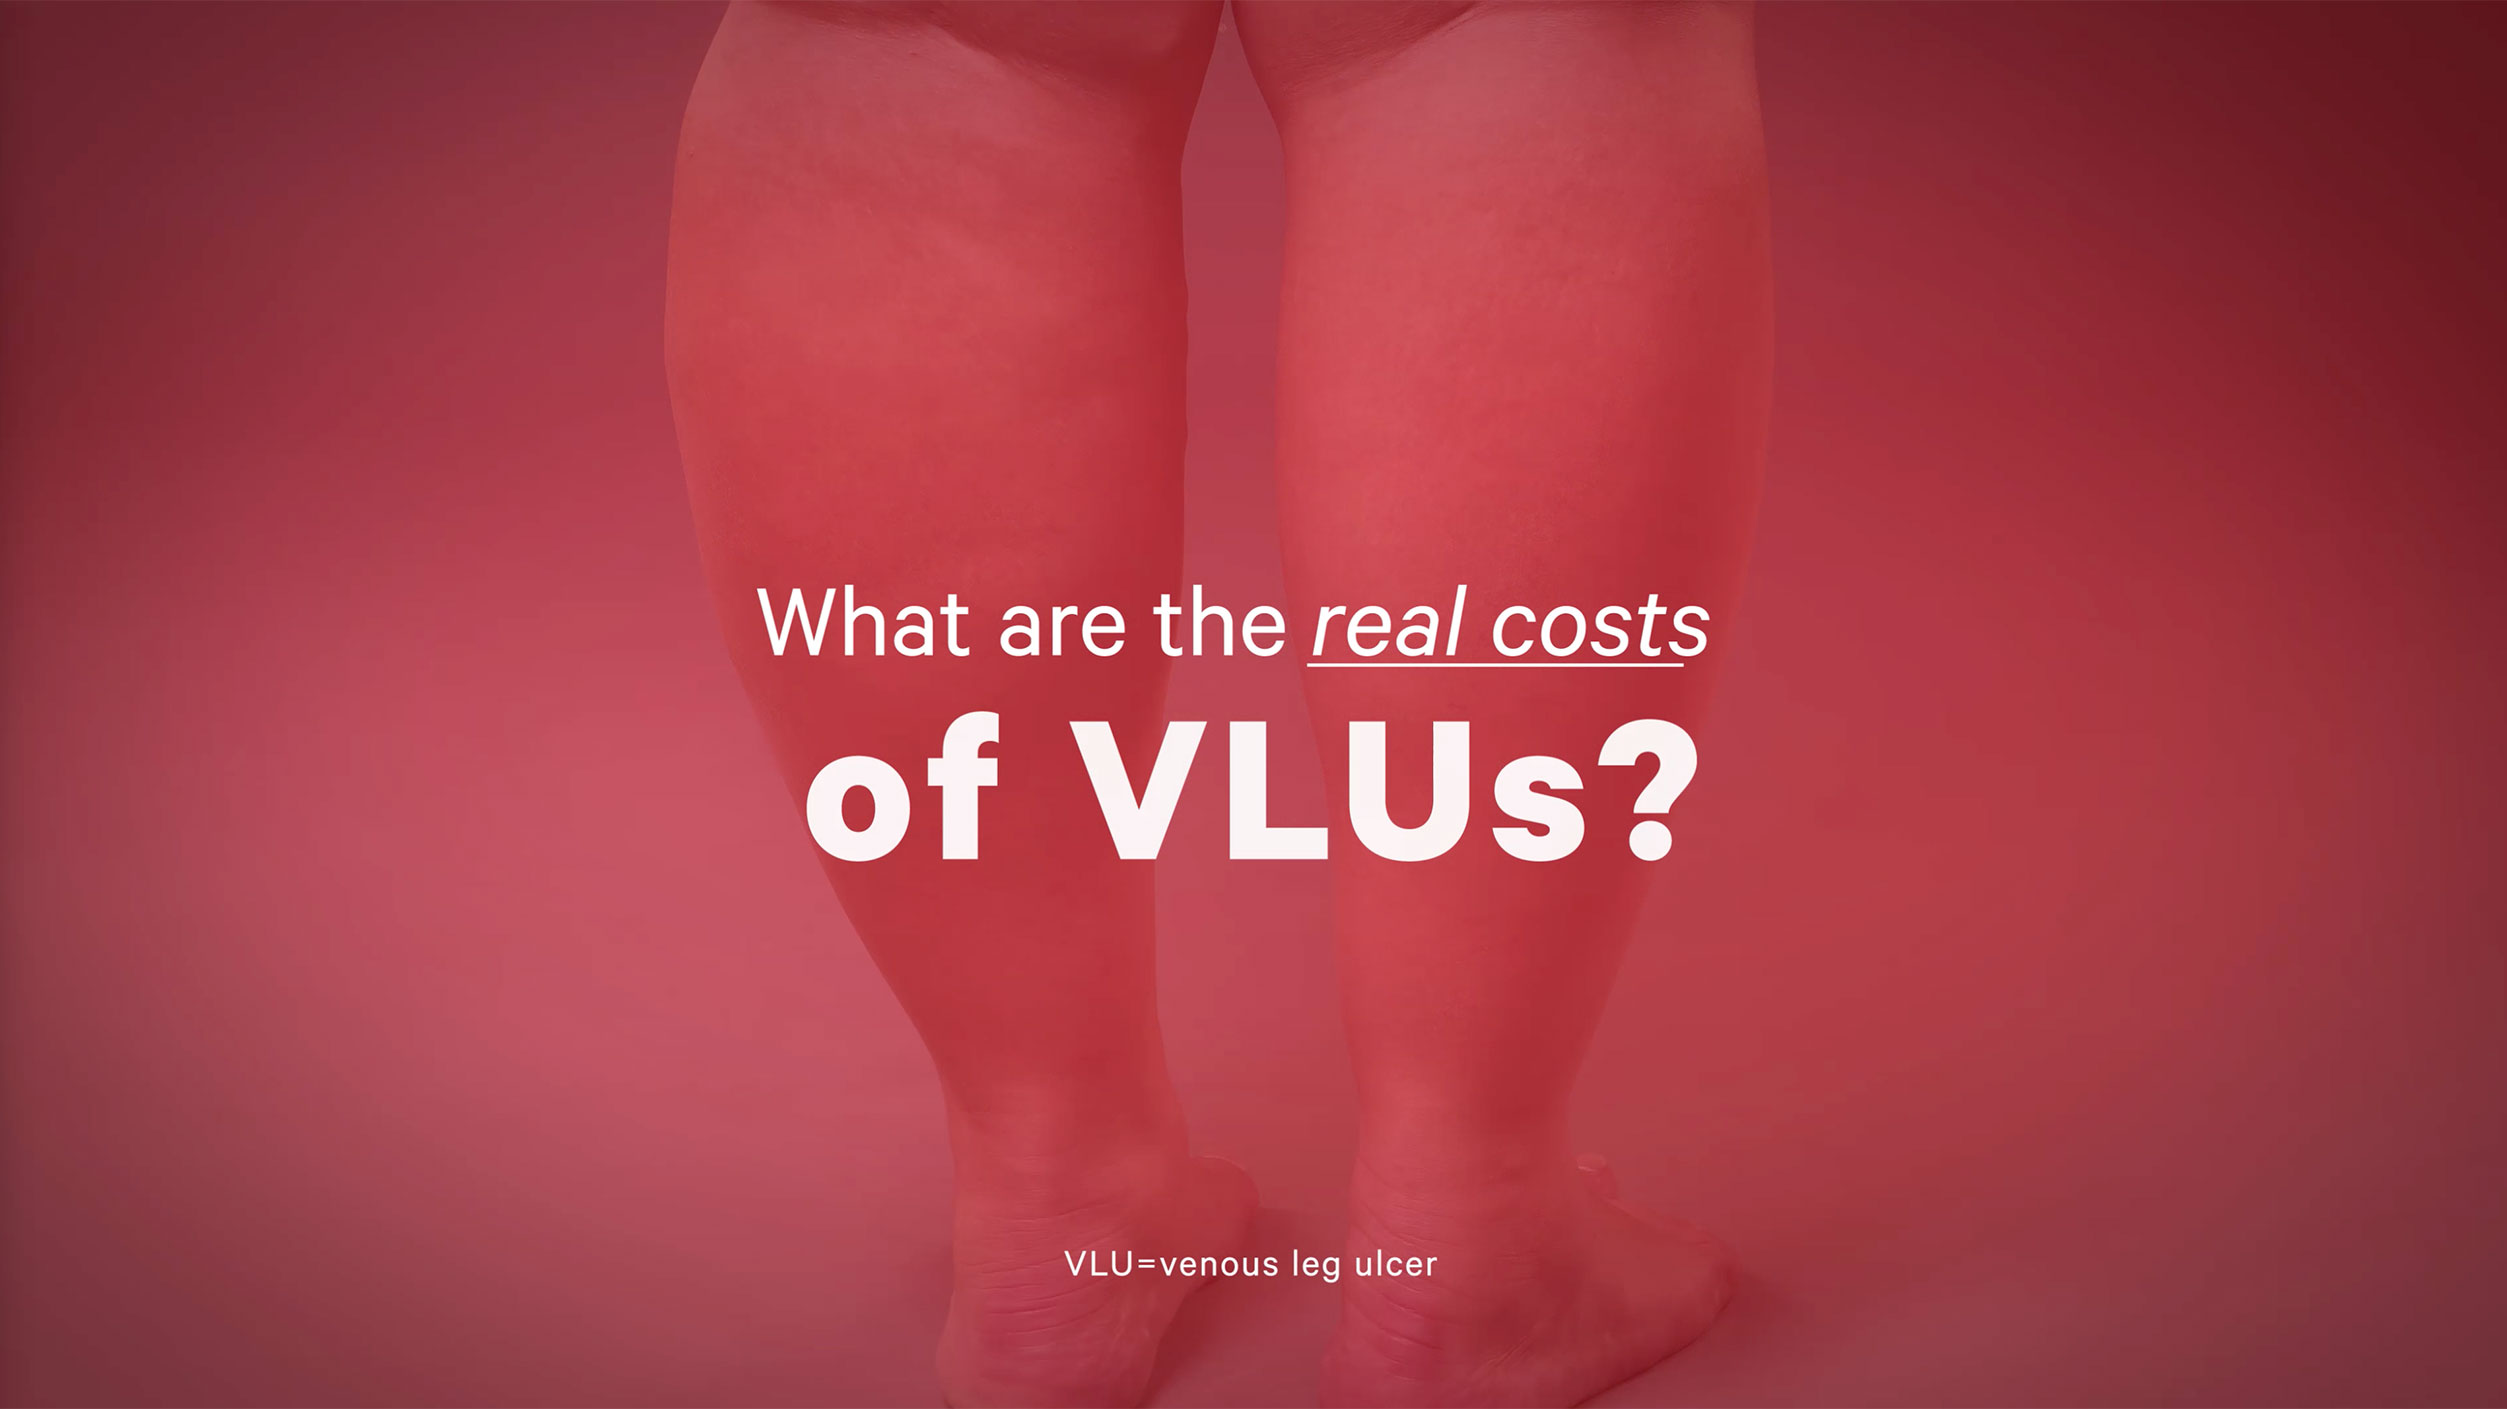 Video on the real costs of VLUs